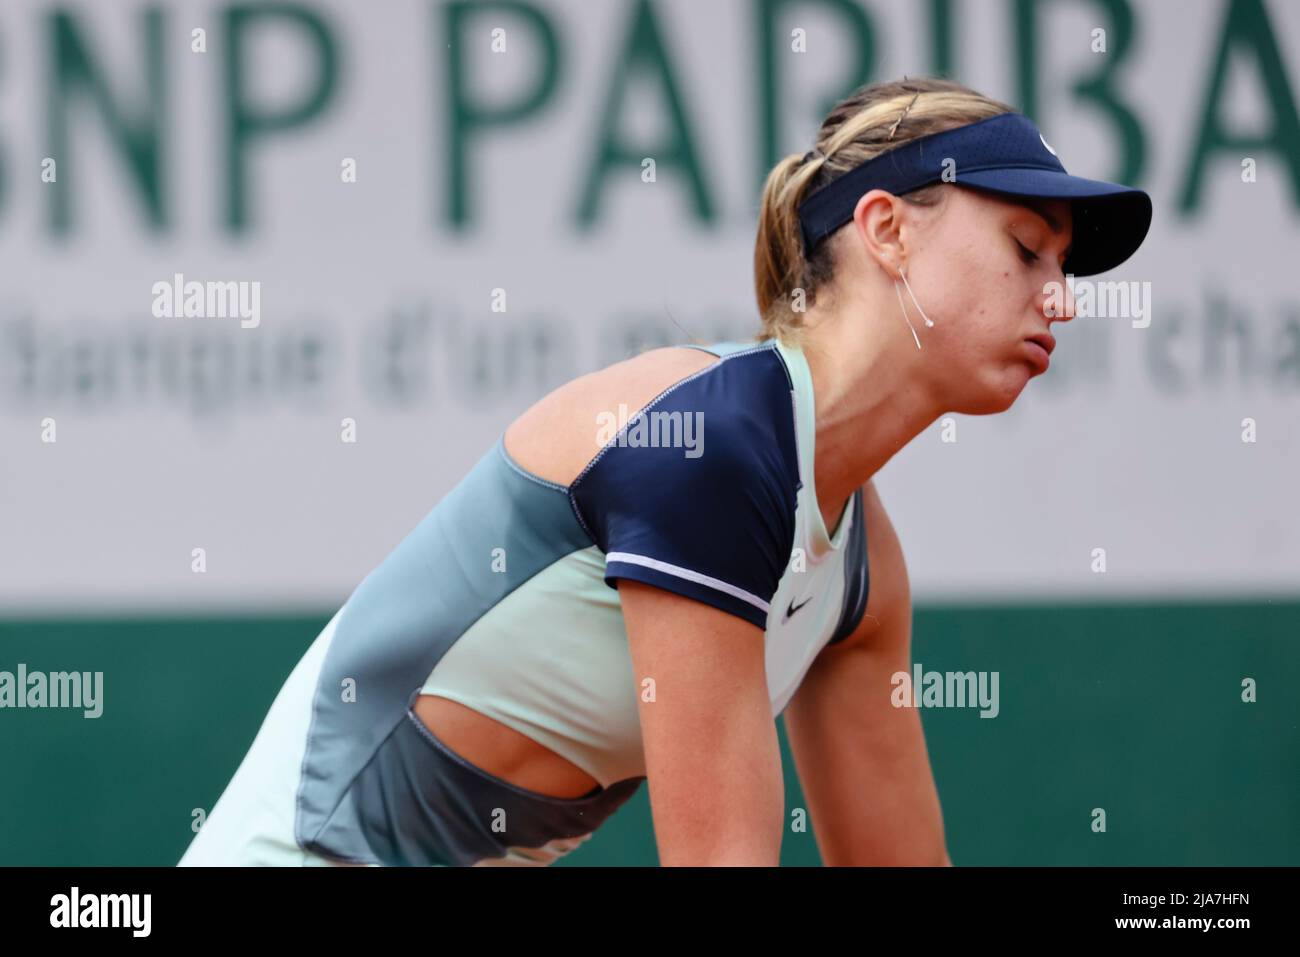 Paris, France. 28th May, 2022. Tennis player Paula Badosa from Spain is in action at the 2022 French Open Grand Slam tennis tournament in Roland Garros, Paris, France. Frank Molter/Alamy Live news Stock Photo